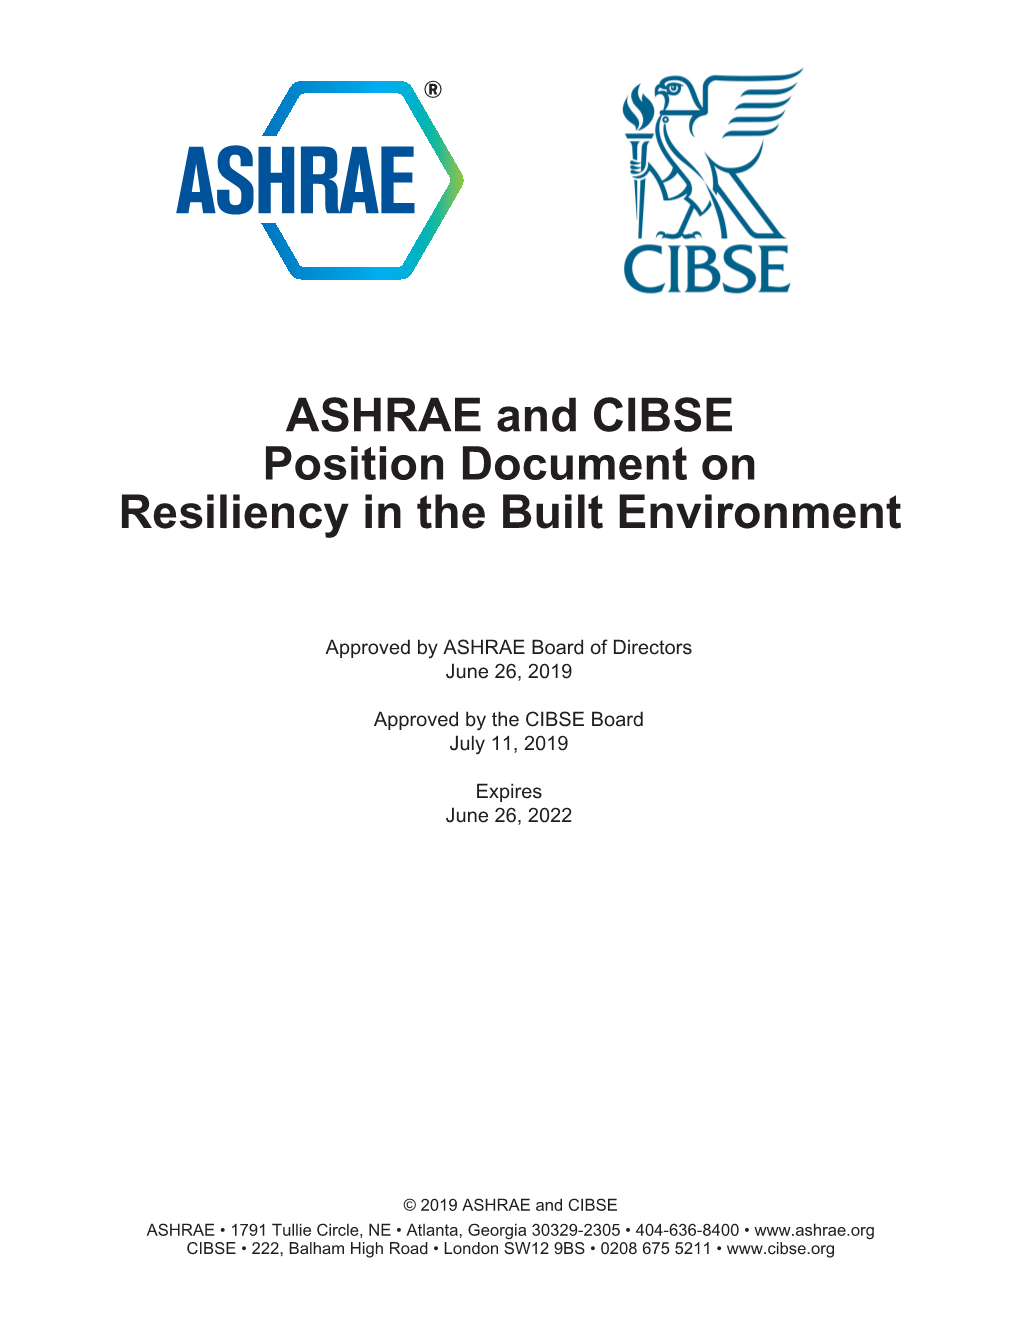 Position Document on Resiliency in the Built Environment